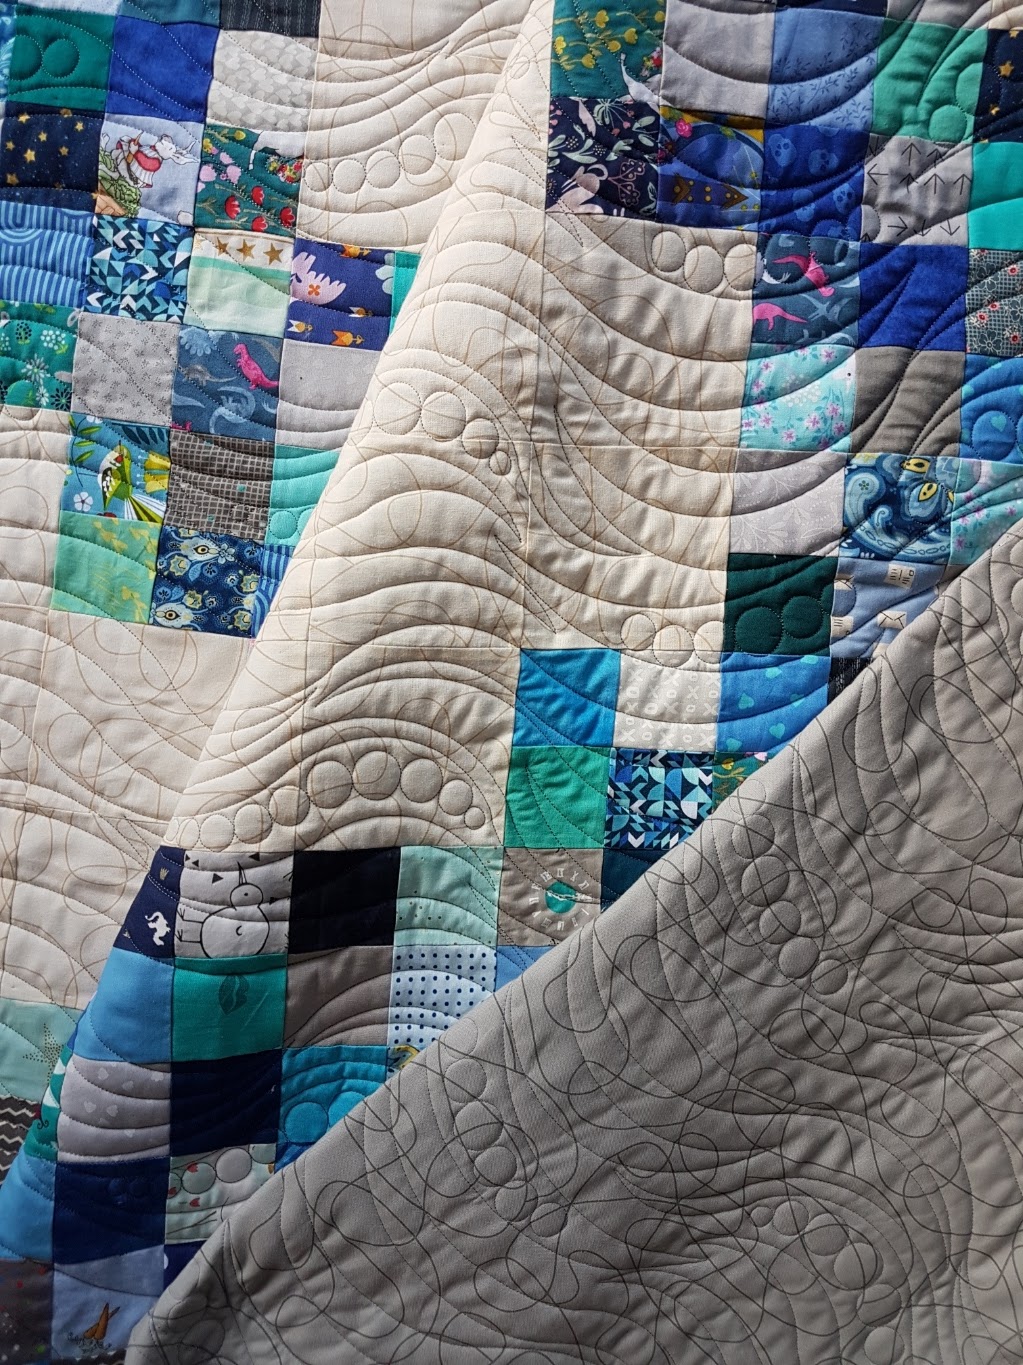 quiltmekiwi: Quilting for Ingrid, Iris, Linda and Marcelle.